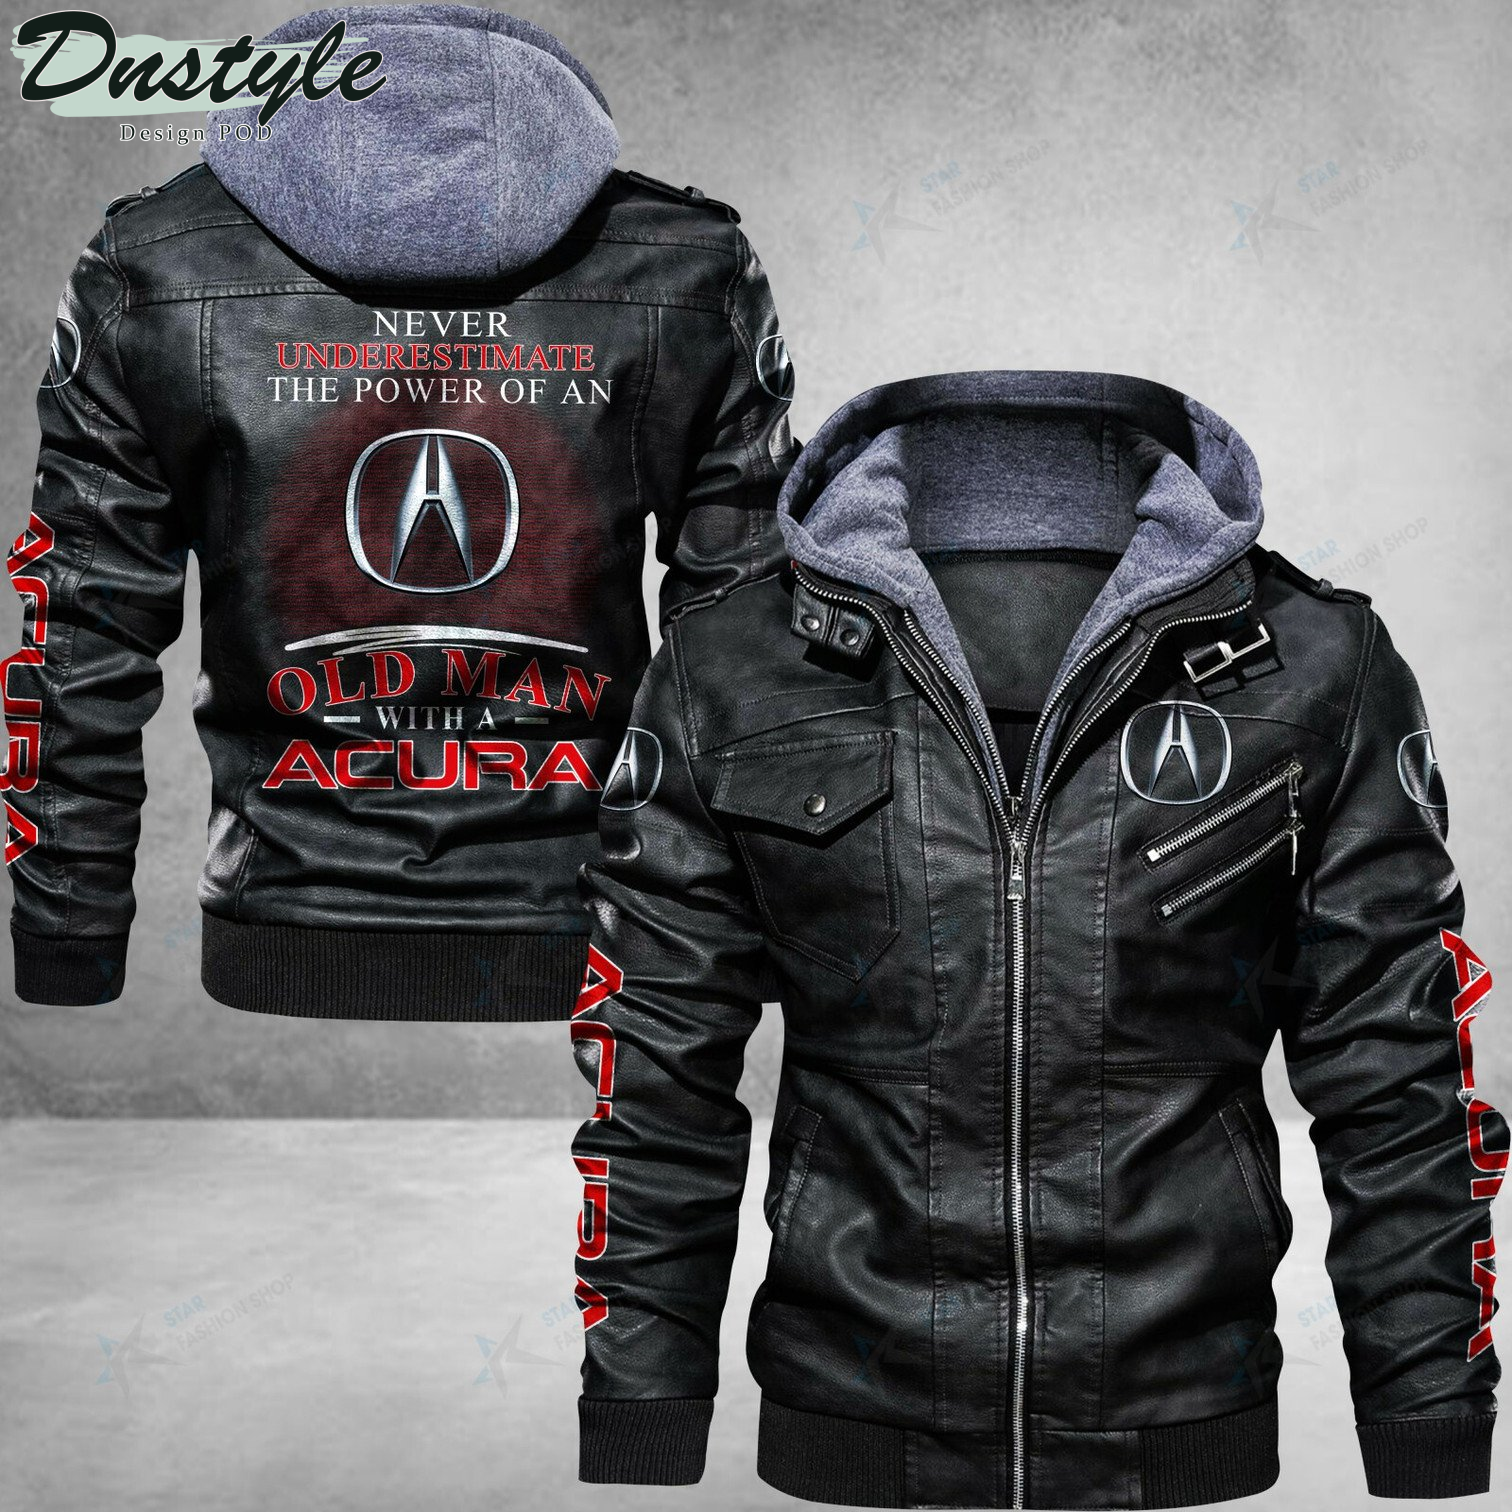 Acura never underestimate the power of an old man leather jacket